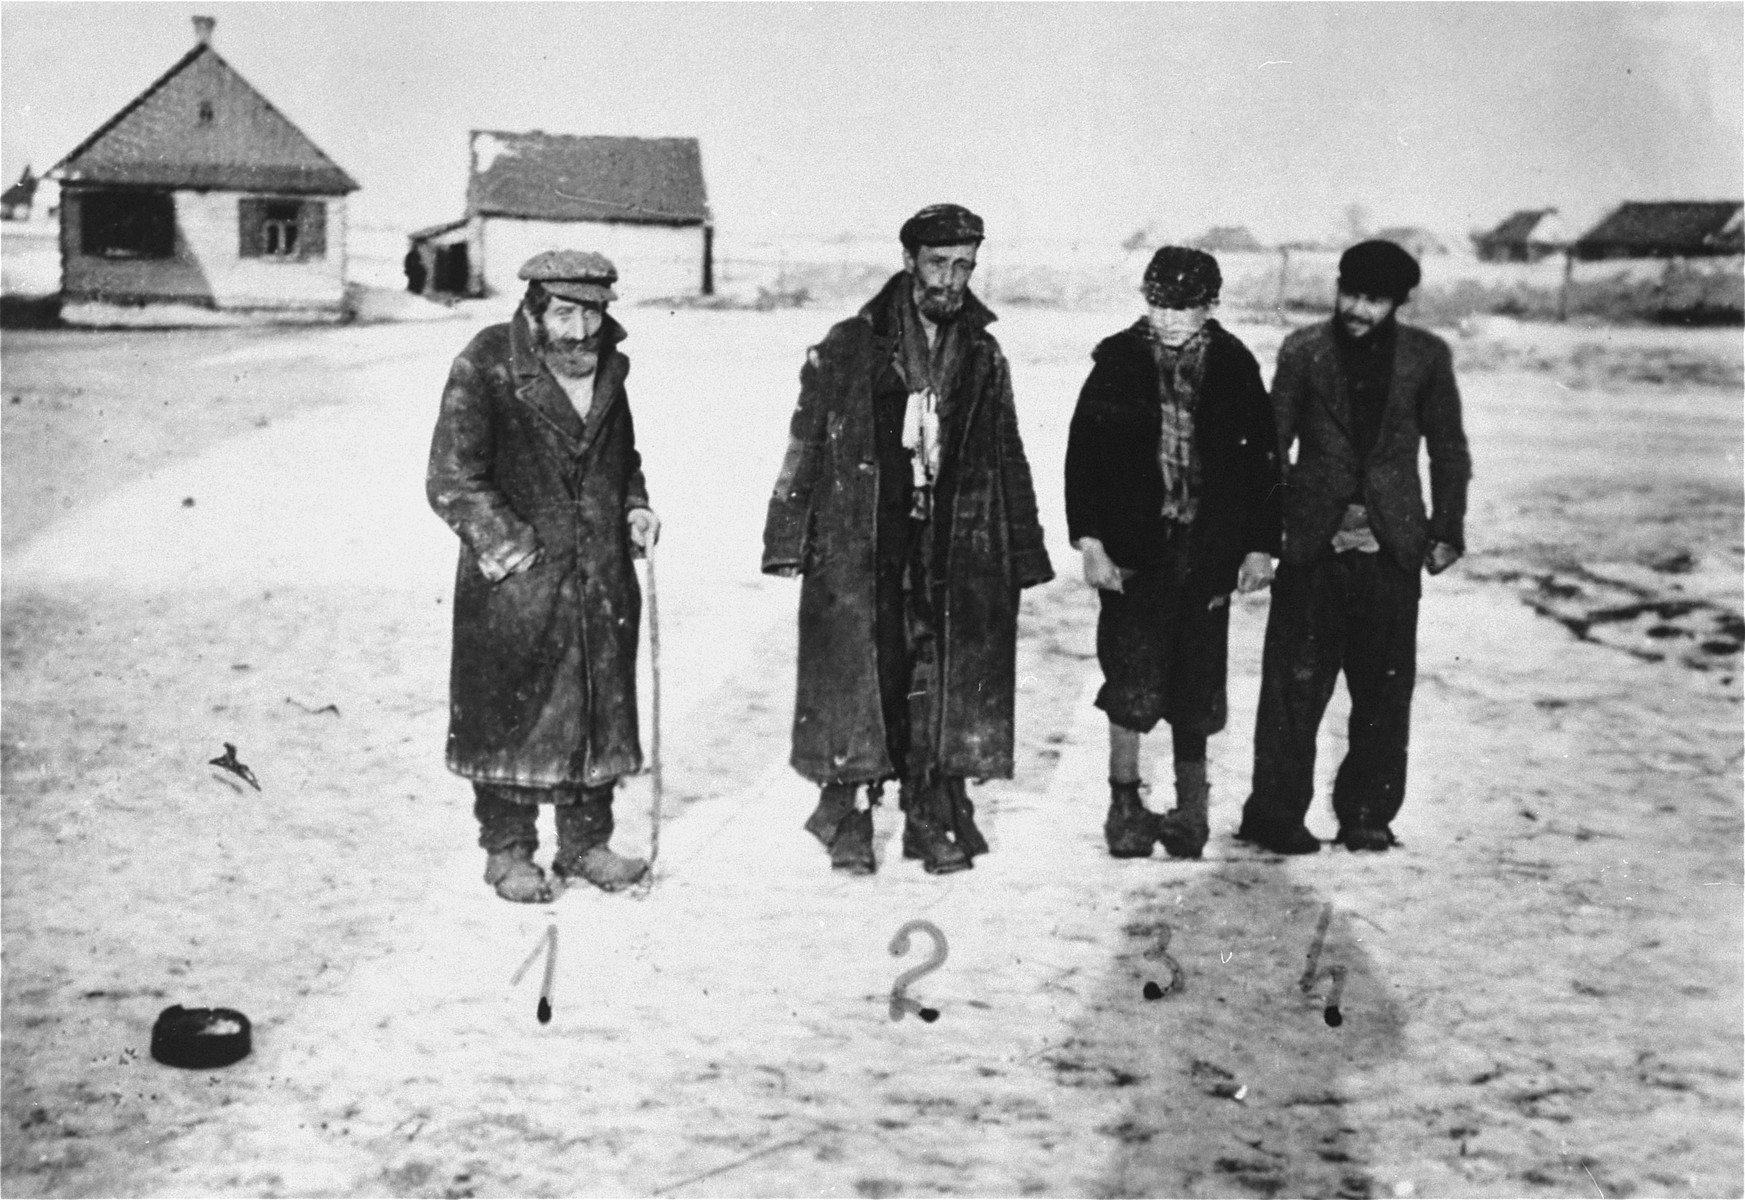 Four Jewish men pose on an unpaved road in the Wisznice ghetto.

Pictured from left to right are: Jeko Frydman, Zachary Bajmdzole, Pinkus Rozenberg and Moszko Kaszemadzer.